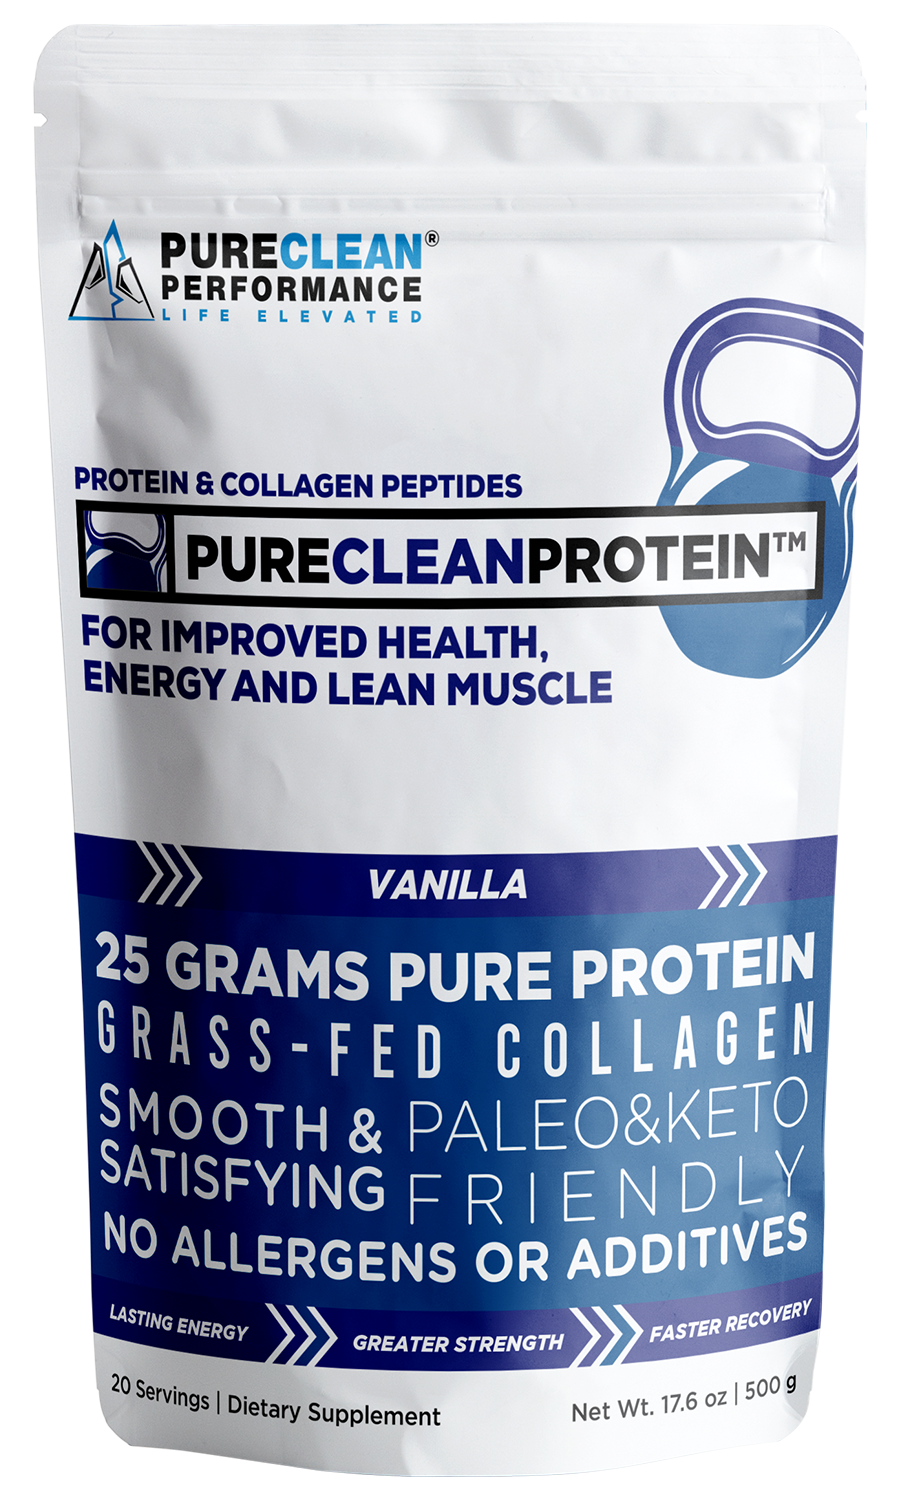 PURECLEAN PROTEIN™ - Protein and Collagen Peptides – PureClean Performance